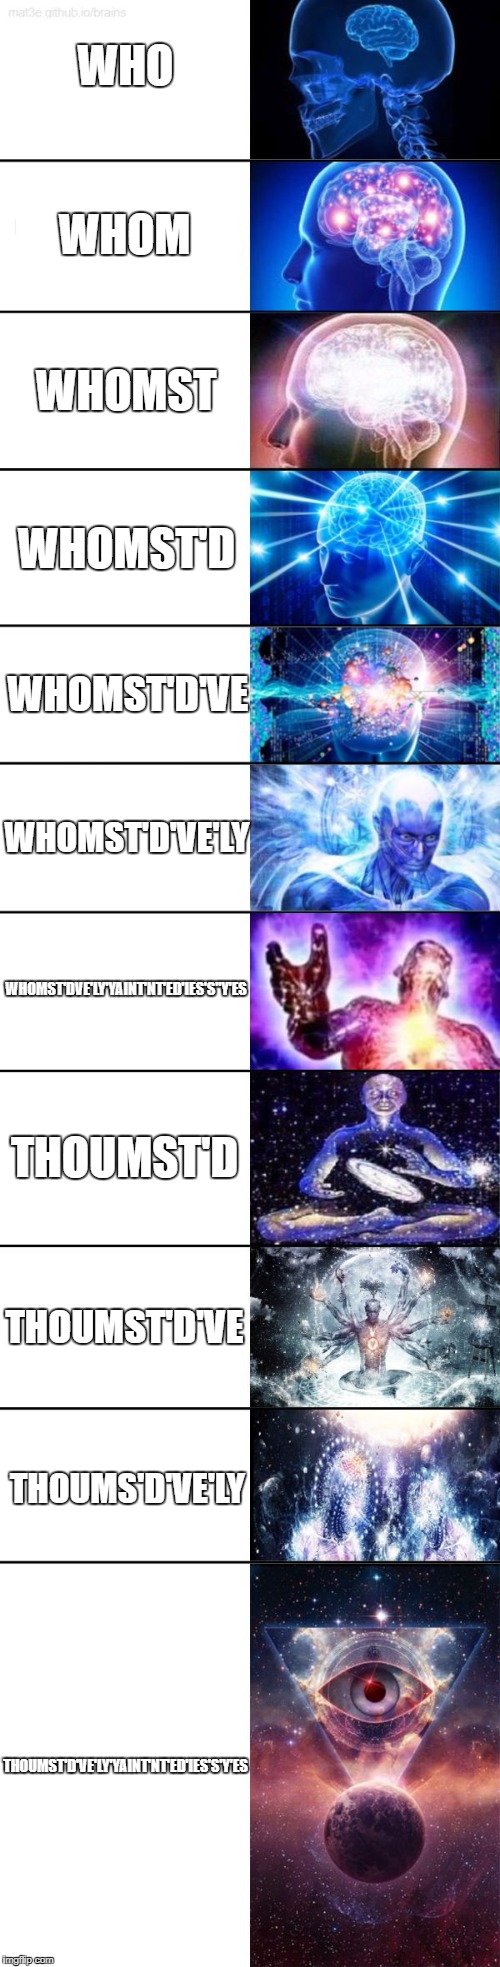 Extended Expanding Brain | WHO; WHOM; WHOMST; WHOMST'D; WHOMST'D'VE; WHOMST'D'VE'LY; WHOMST'DVE'LY'YAINT'NT'ED'IES'S''Y'ES; THOUMST'D; THOUMST'D'VE; THOUMS'D'VE'LY; THOUMST'D'VE'LY'YAINT'NT'ED'IES'S'Y'ES | image tagged in extended expanding brain | made w/ Imgflip meme maker